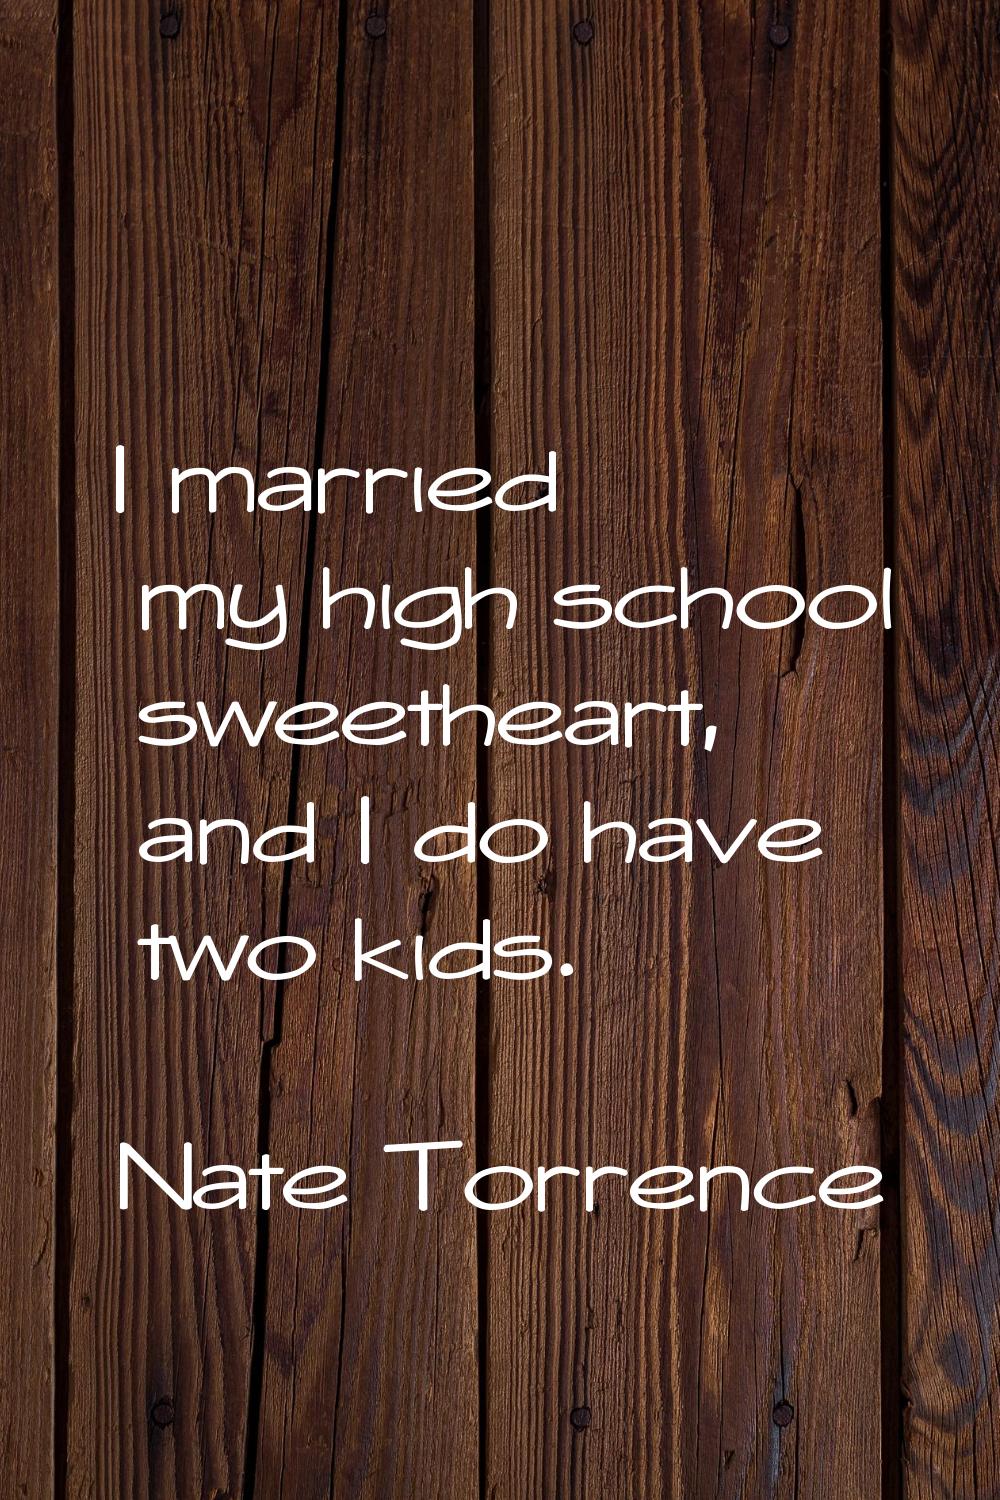 I married my high school sweetheart, and I do have two kids.